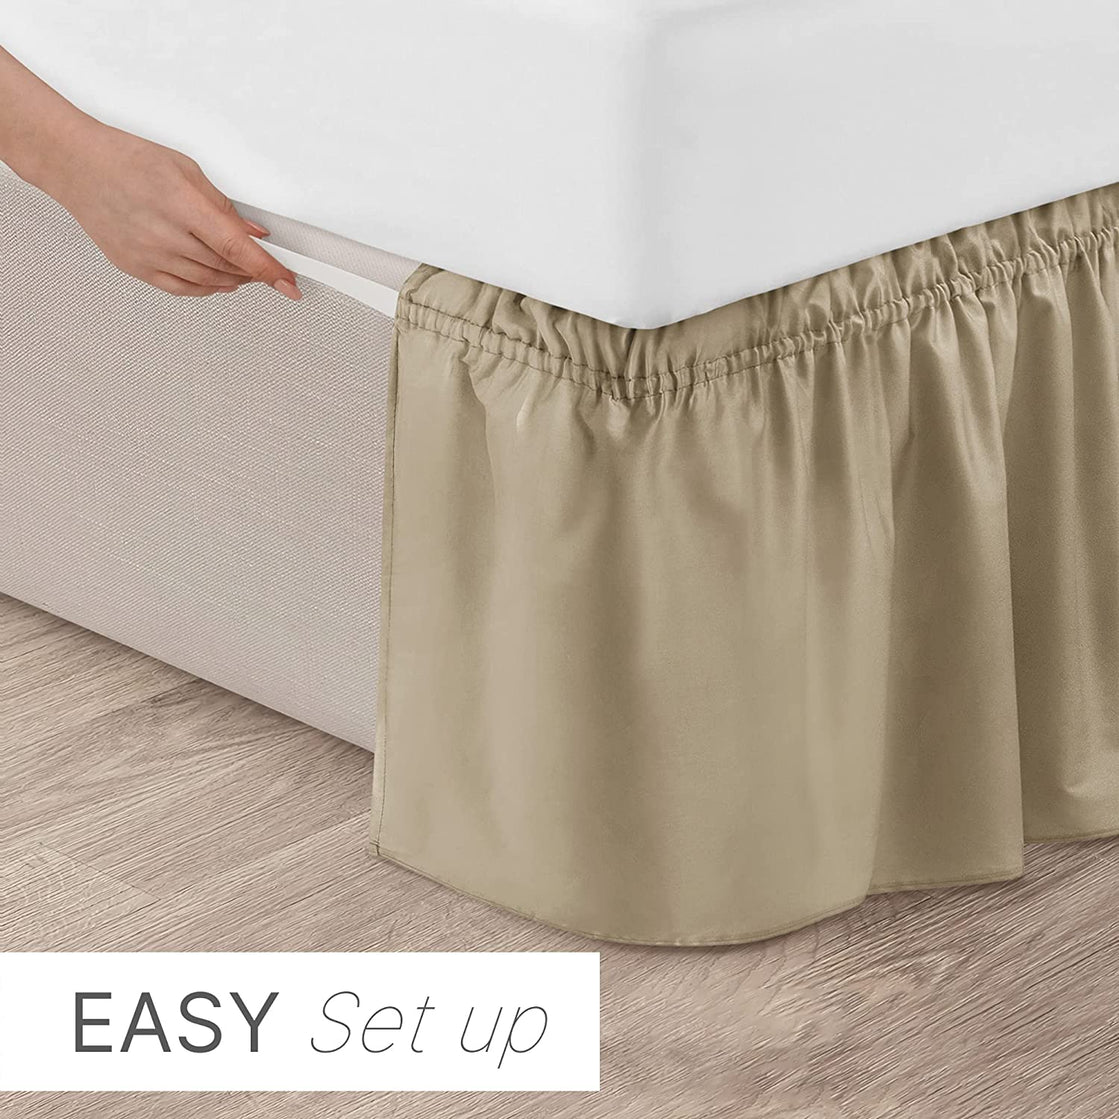 MIYE Wrap Around Ruffled Lace Bed Skirt, Elastic Dust Ruffle with  Adjustable Belts,15 Inch Drop Easy to Put On, Bed Frame Cover, Machine  Washable